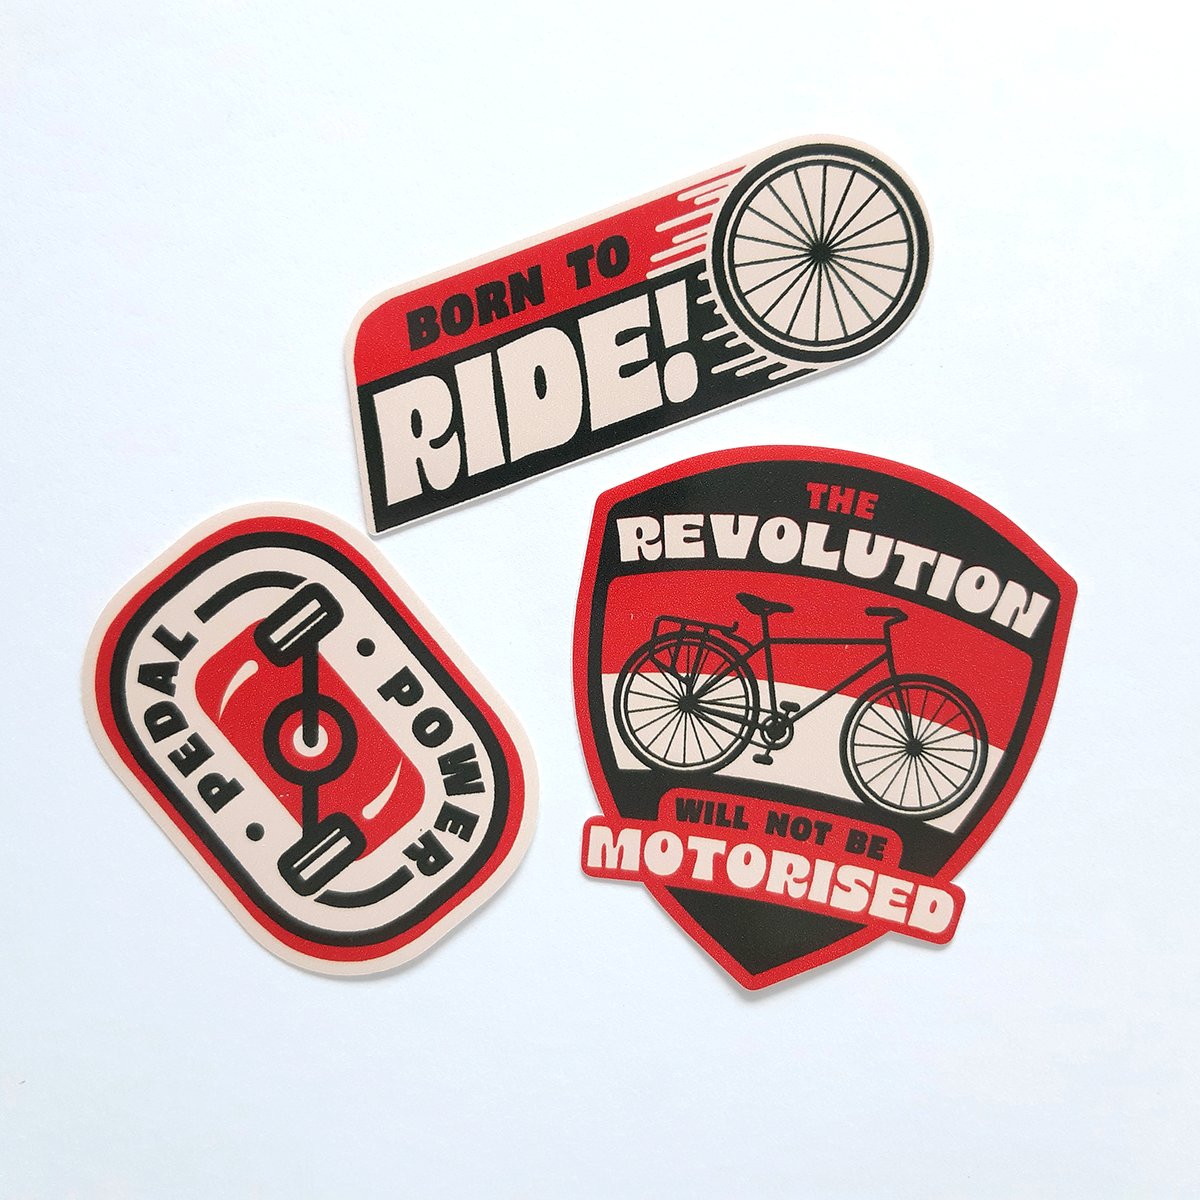 Born To Ride sticker pack